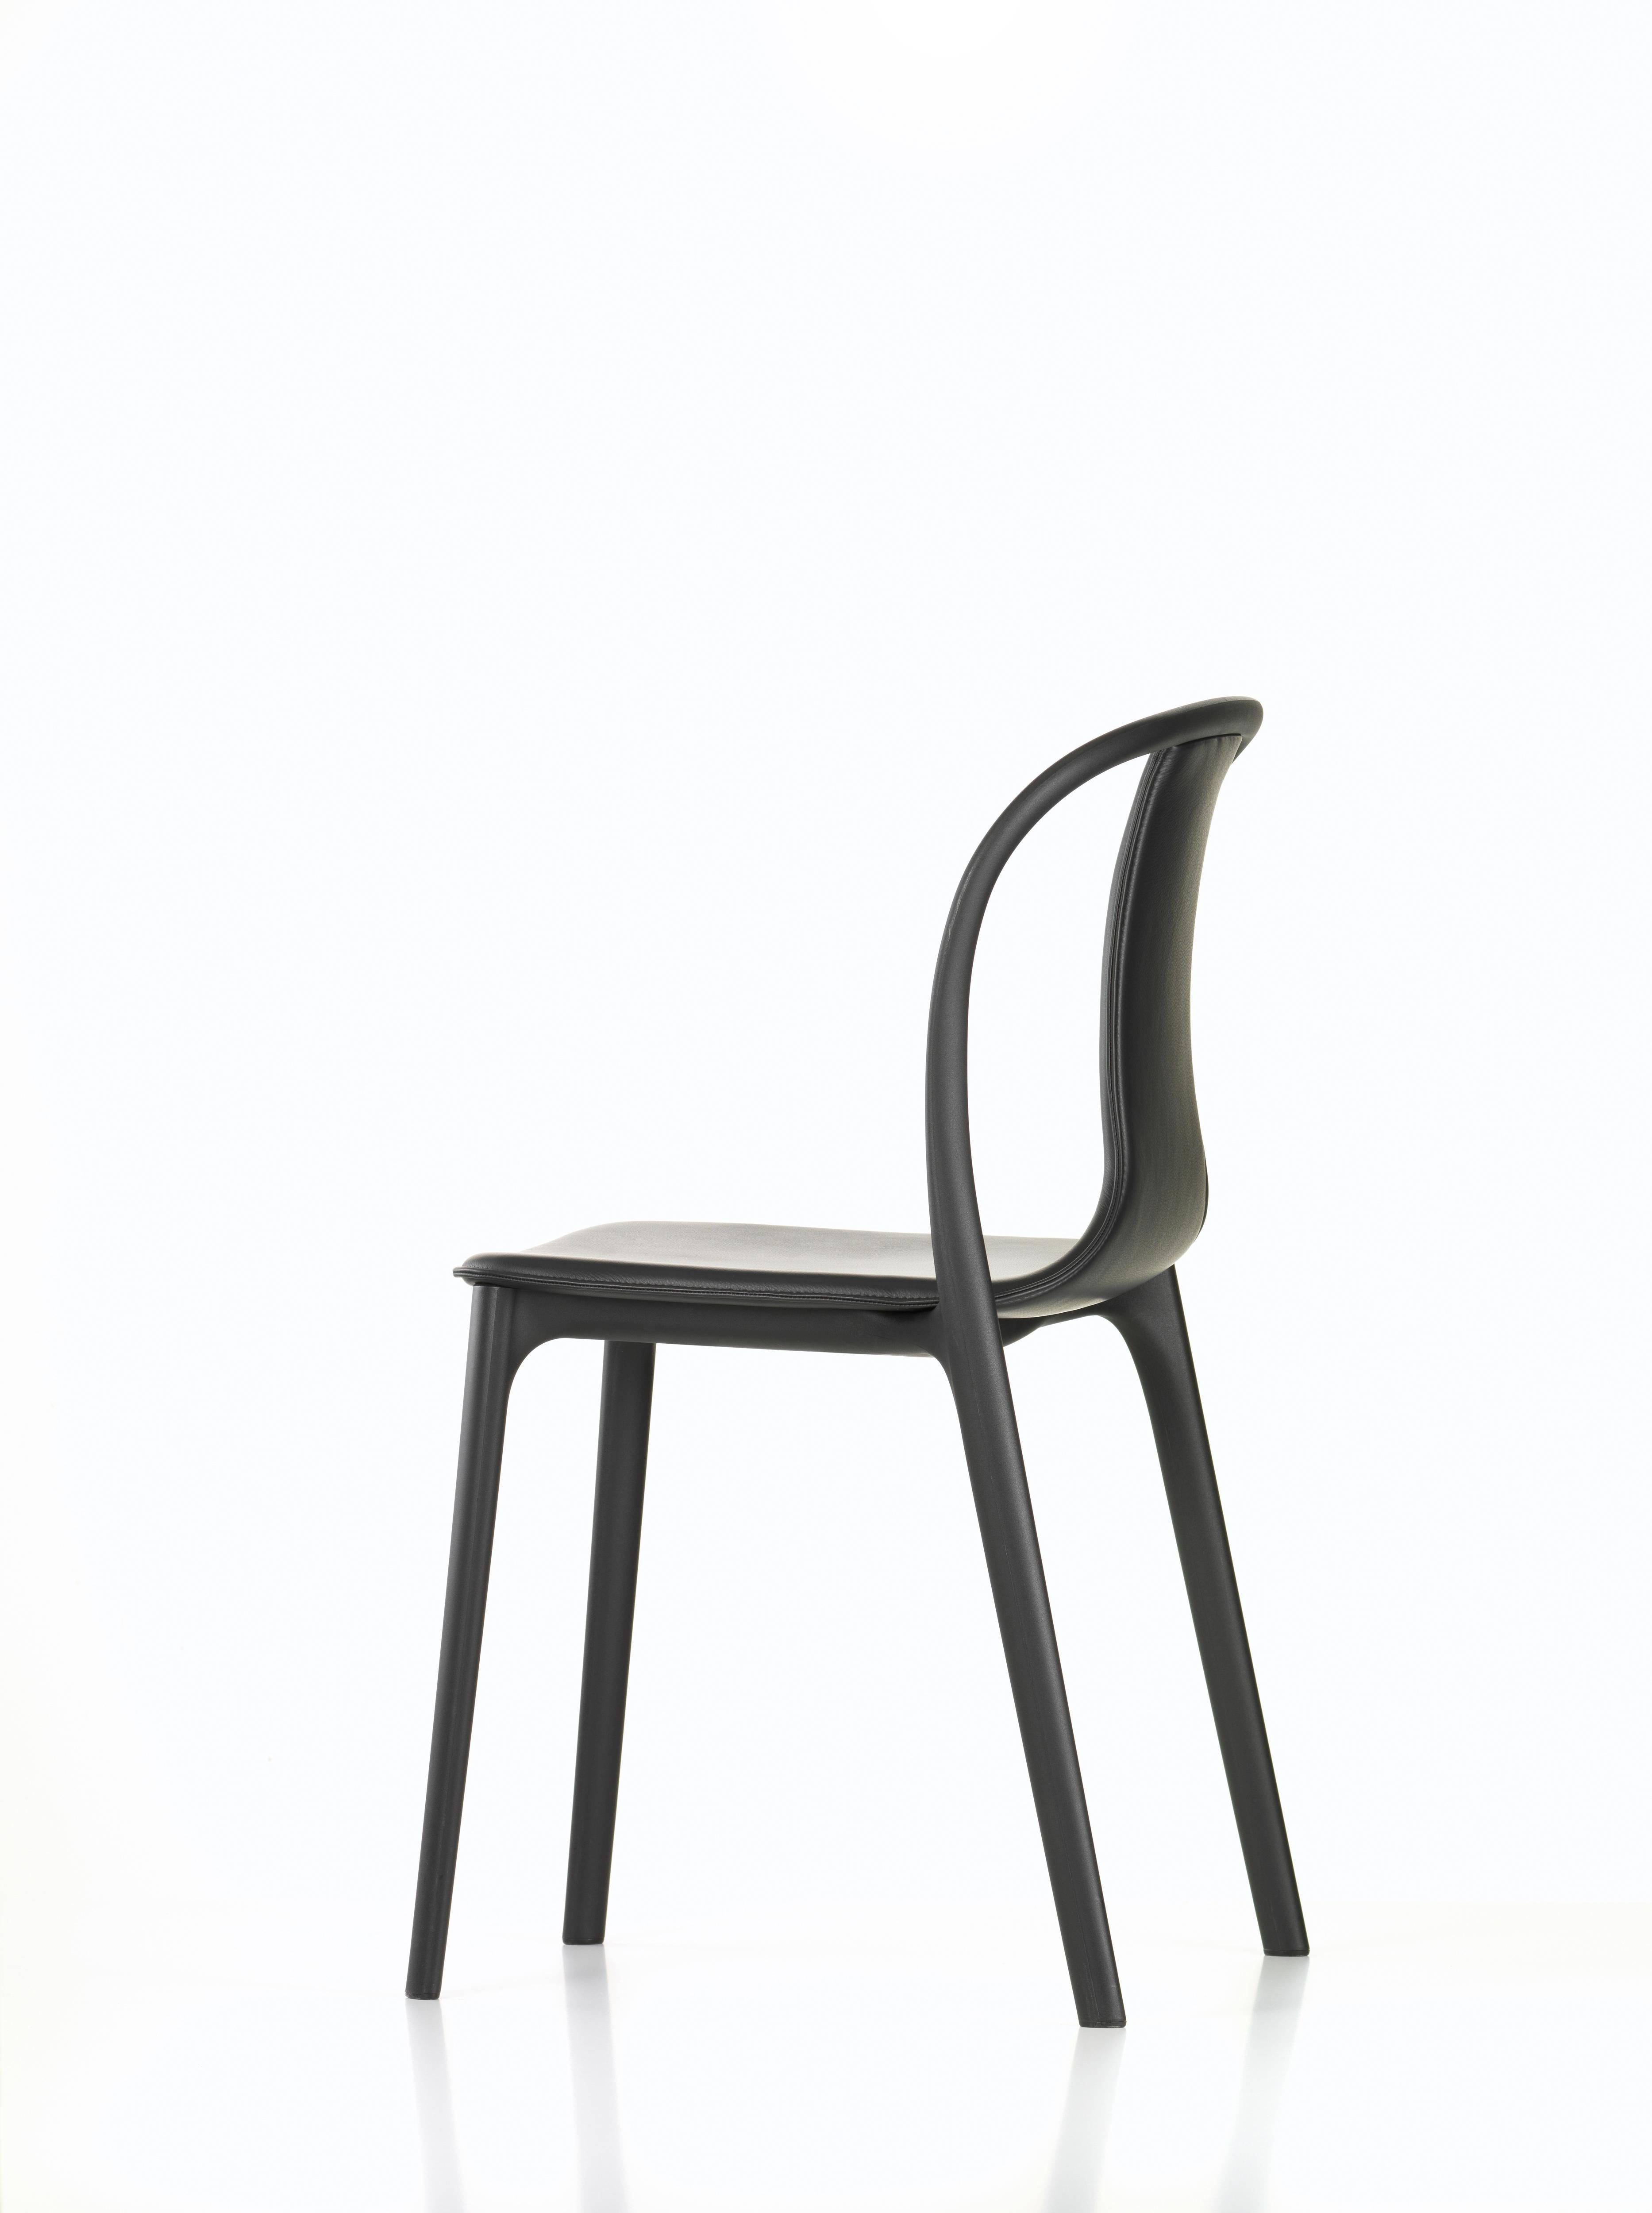 These products are only available in the United States.

Belleville is the name of the vibrant Paris neighbourhood where the designers Ronan and Erwan Bouroullec have their studio. Visual references for the Belleville chair can be found in the